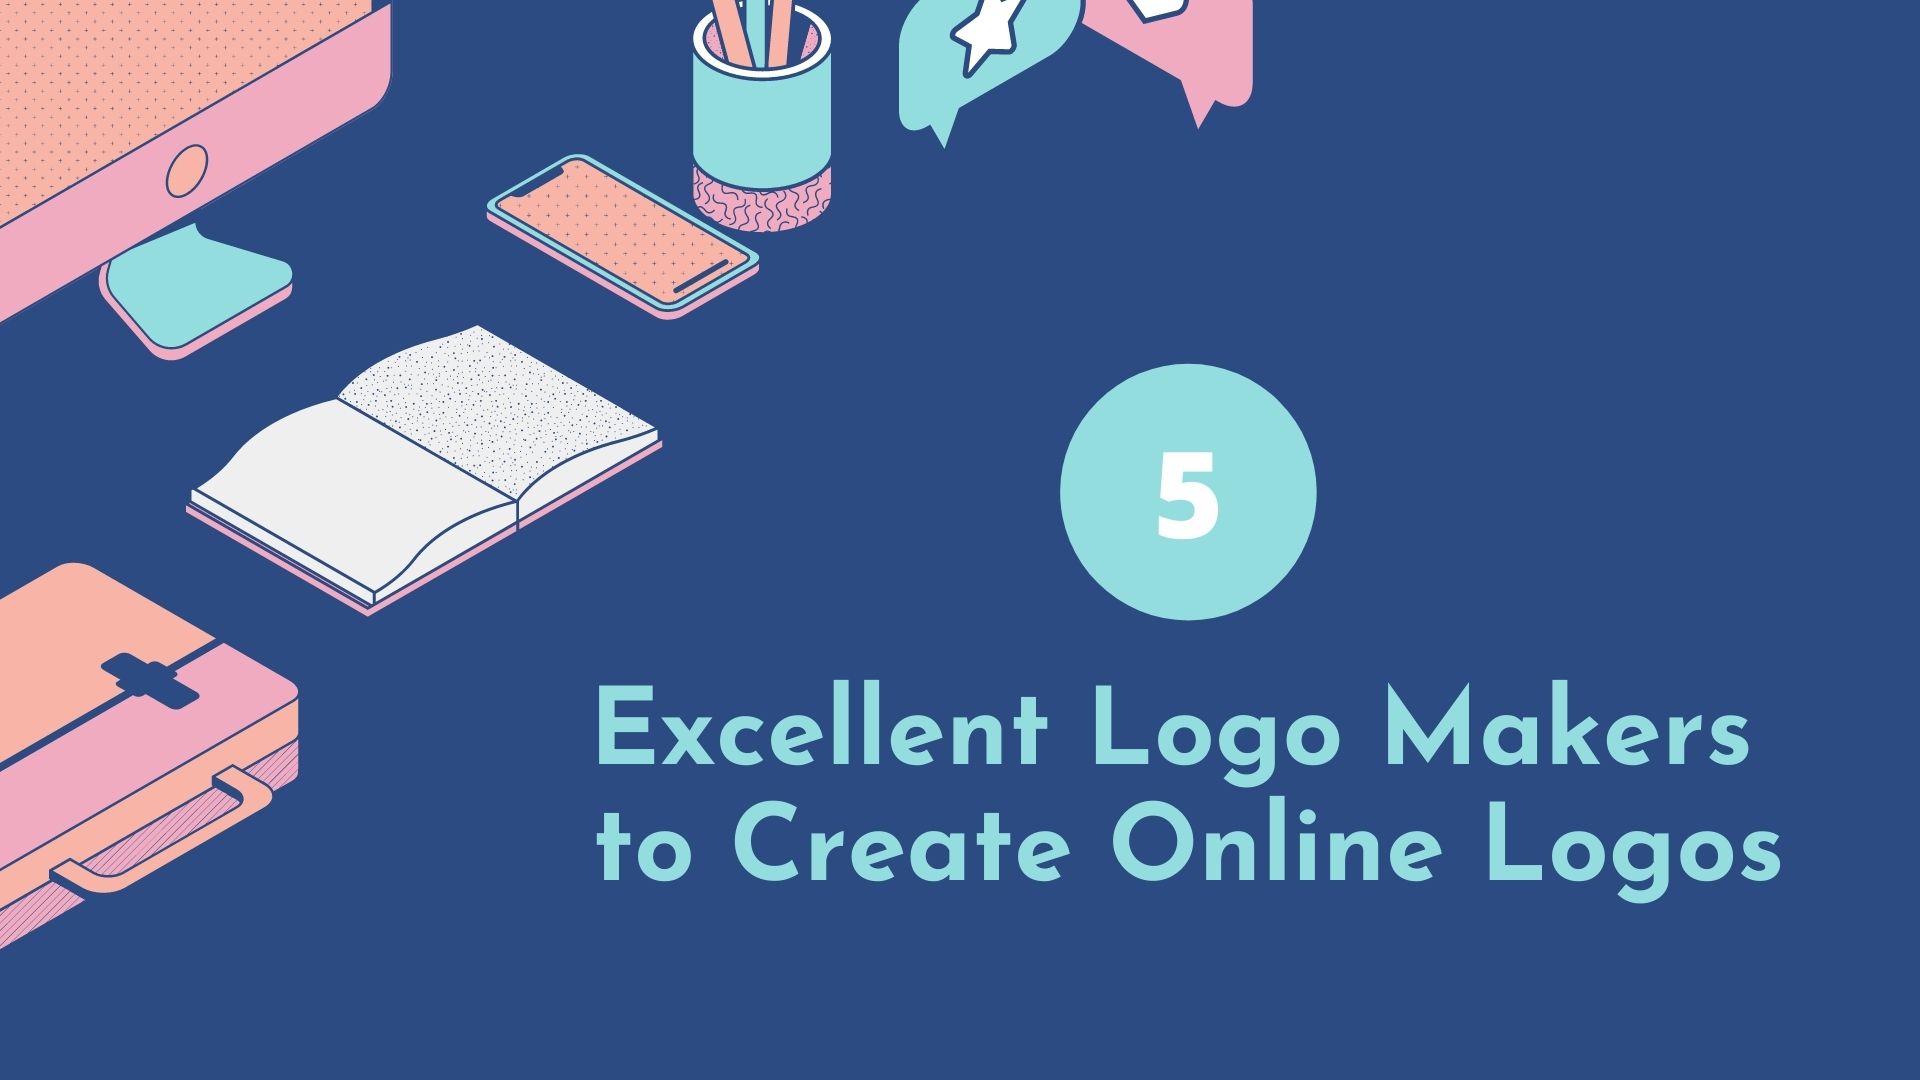 5 Excellent Logo Makers to Create Online Logos